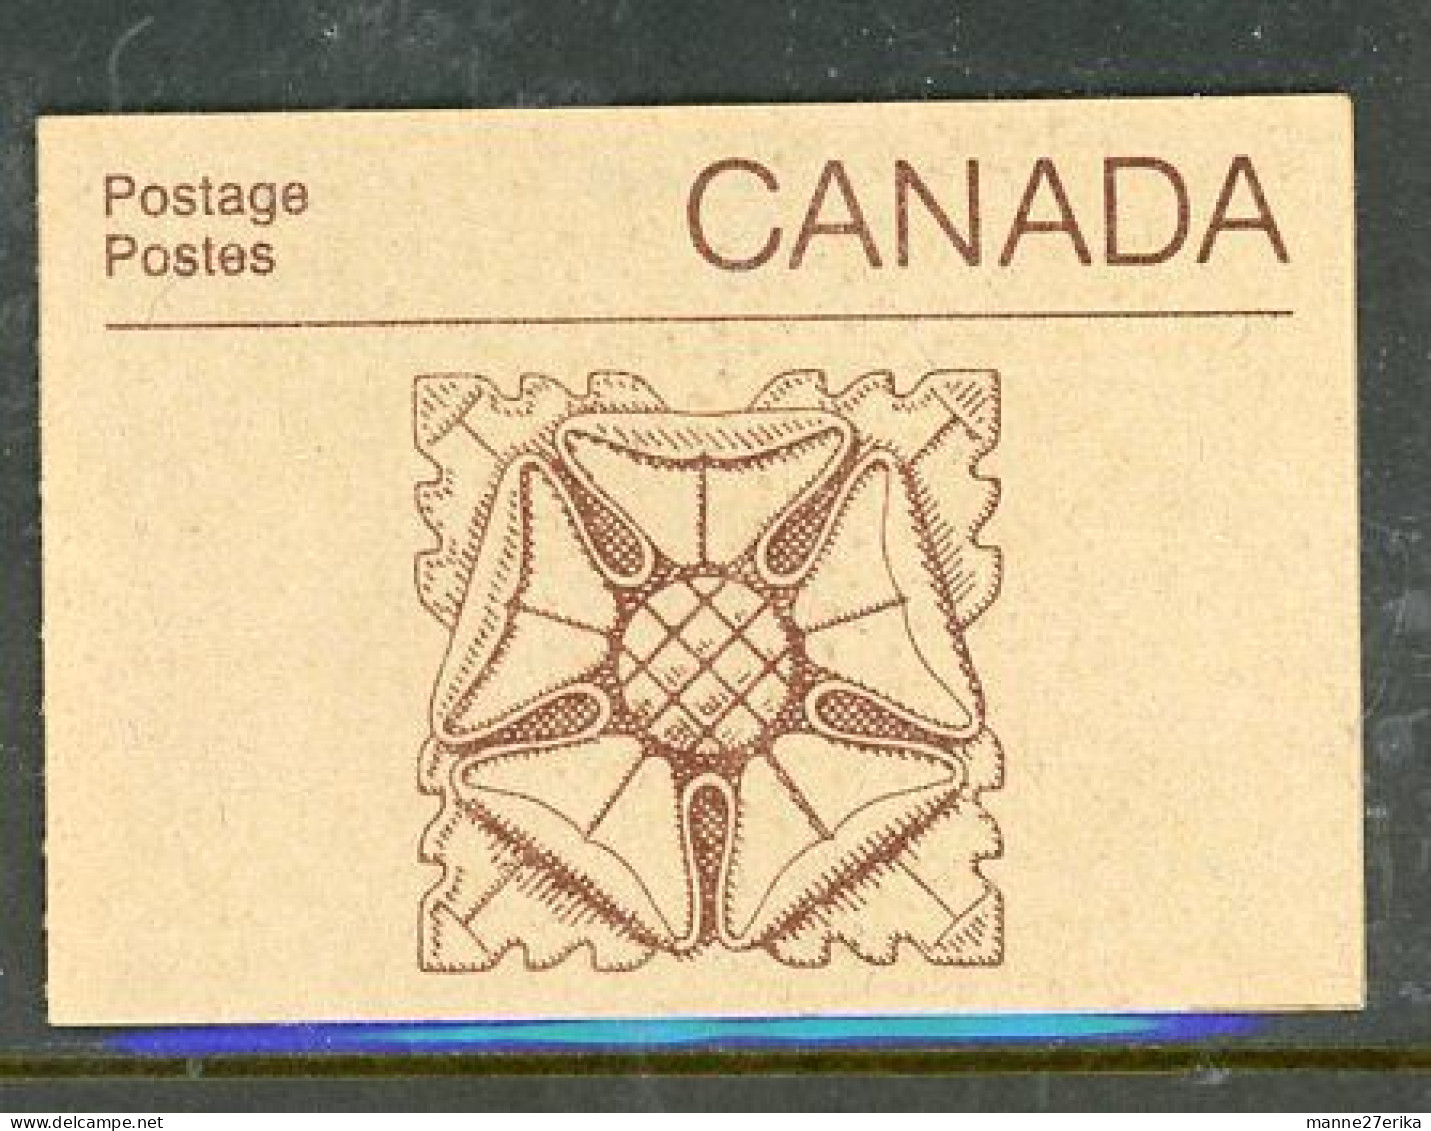 Canada MNH 1985 Booklet "Parliament Buildings" - Neufs